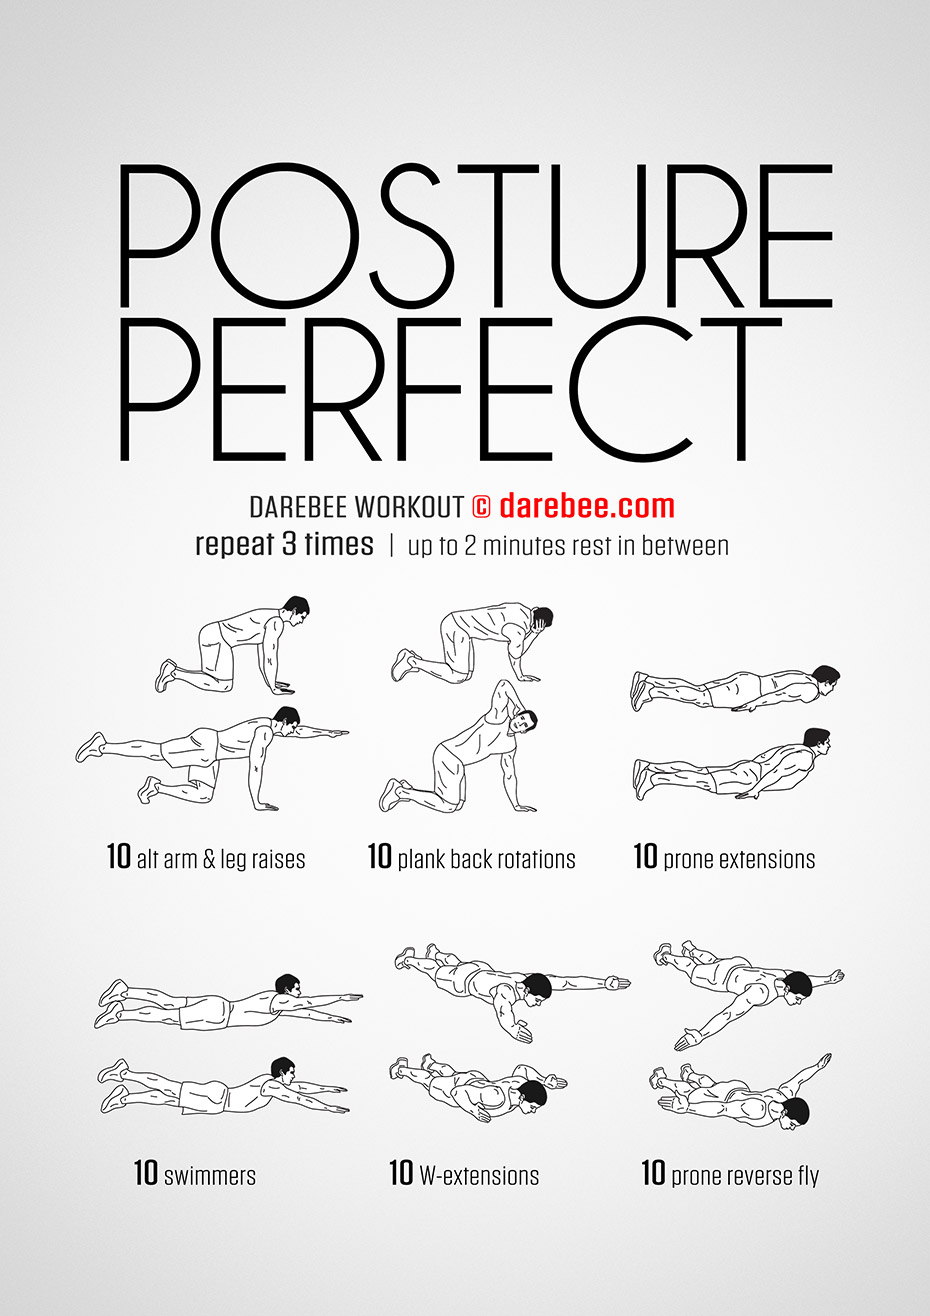 Posture Perfect Workout